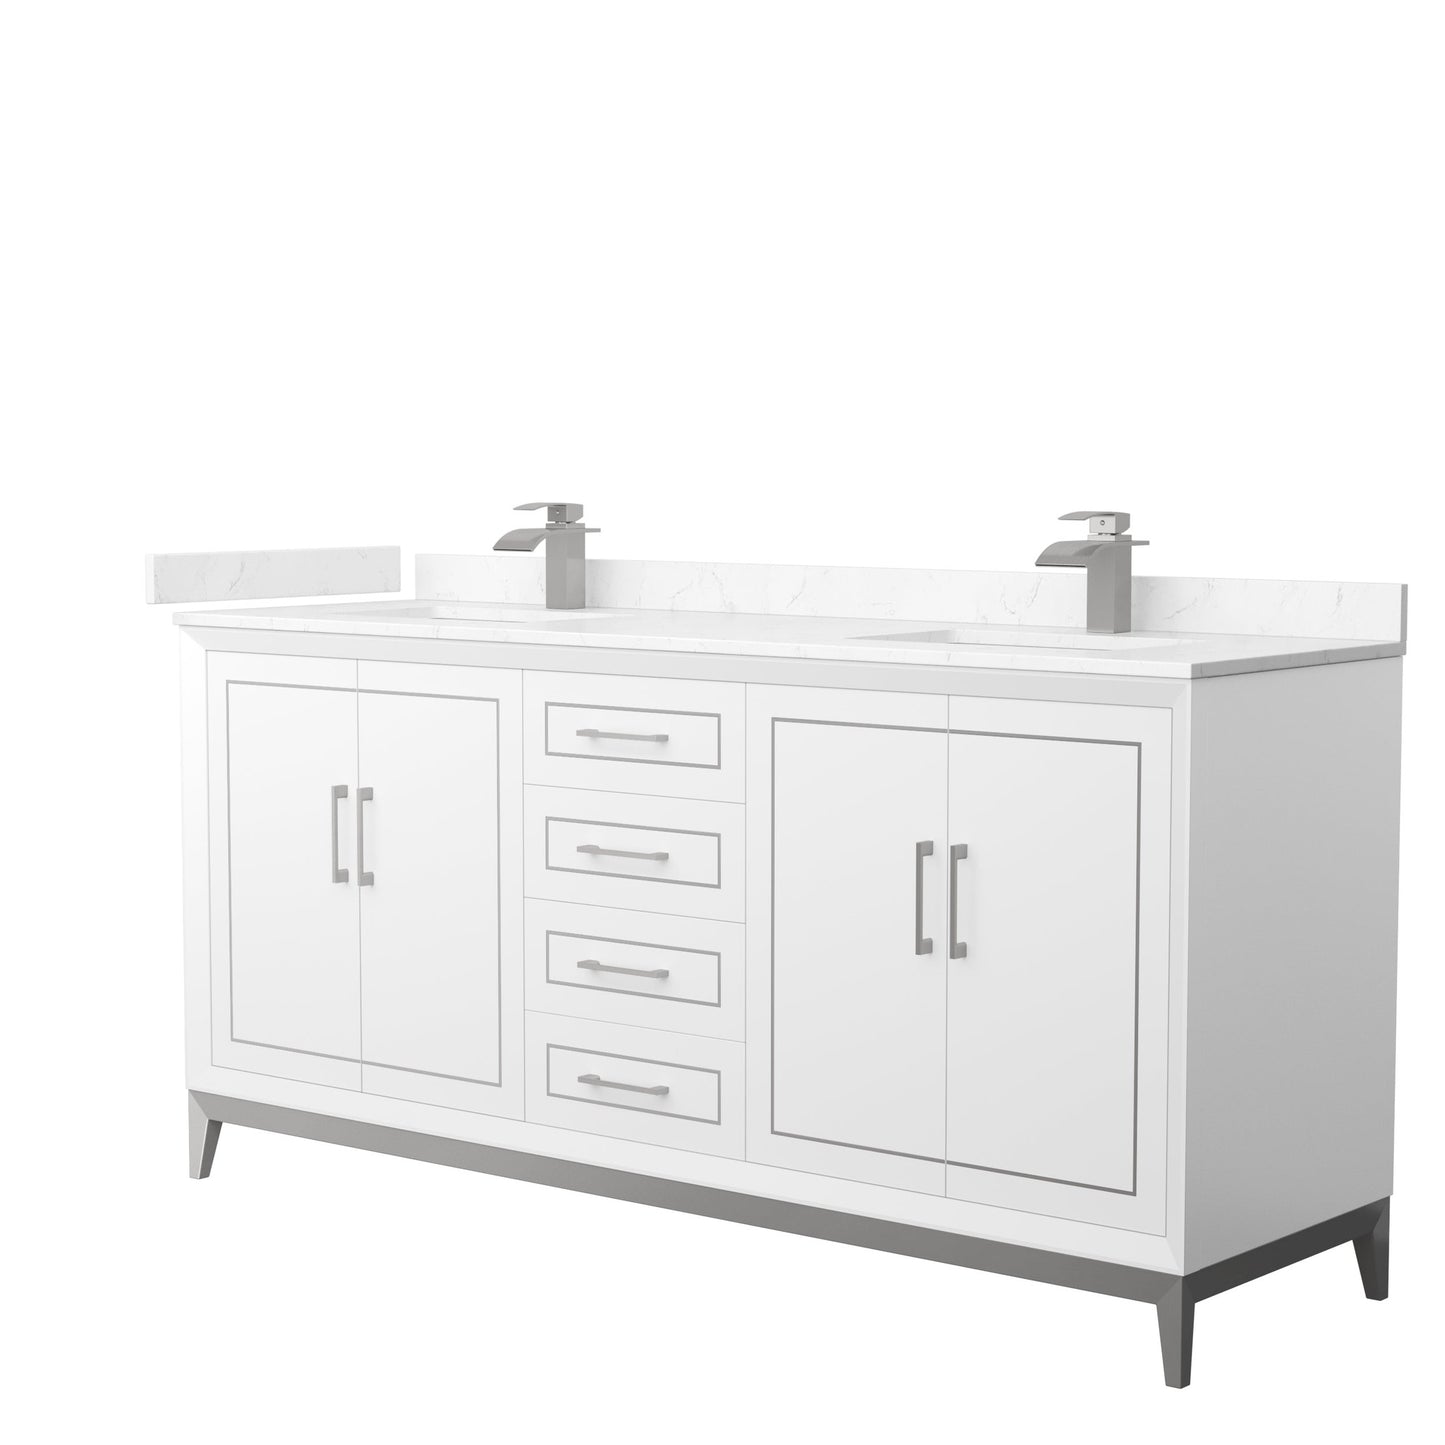 Wyndham Collection Marlena 72" Double Bathroom Vanity in White, Carrara Cultured Marble Countertop, Undermount Square Sinks, Brushed Nickel Trim